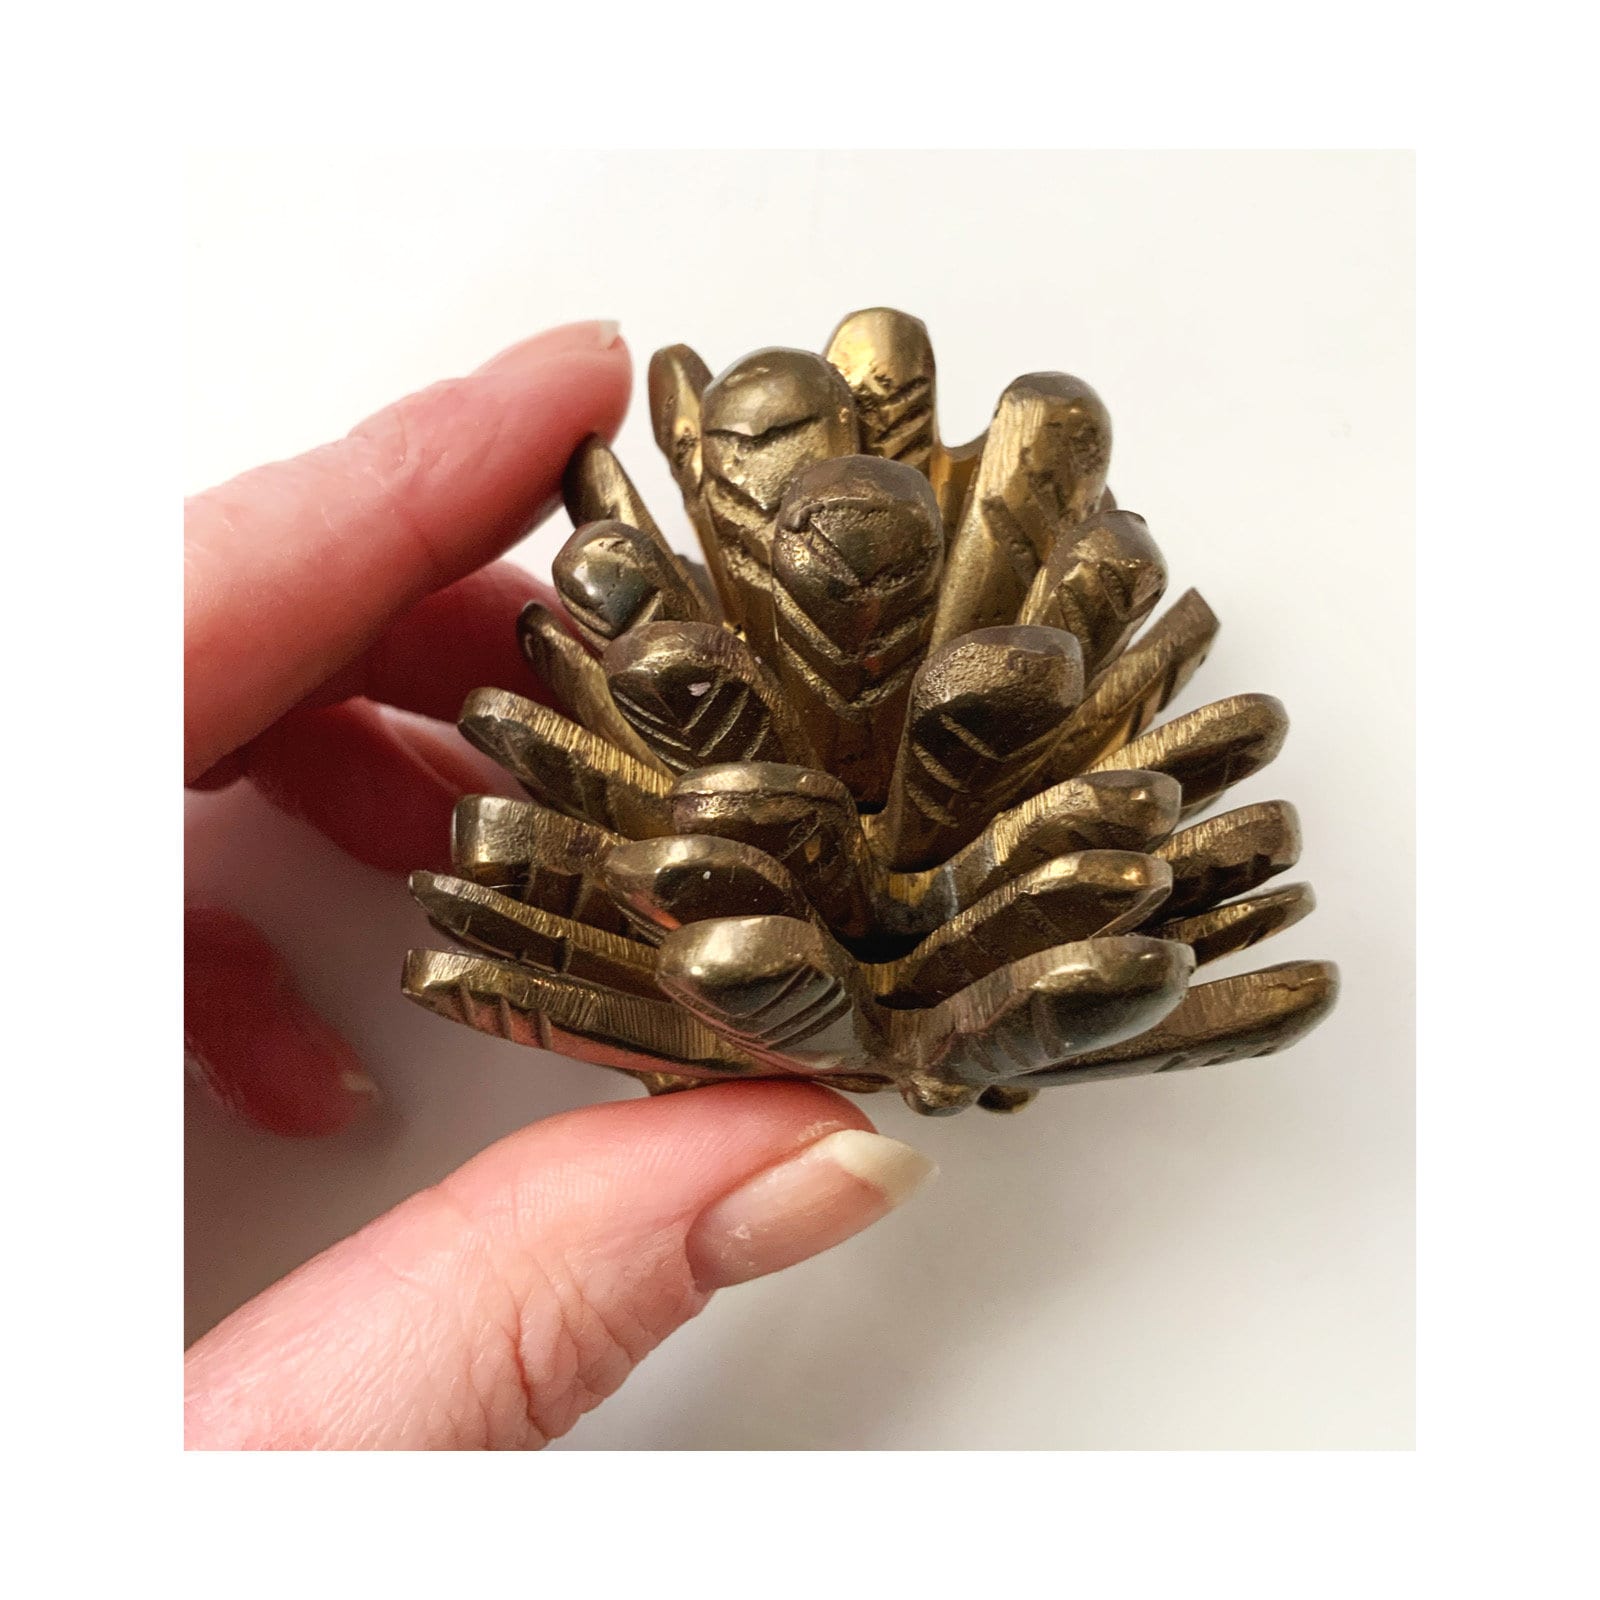 One Small Brass Pinecone Candlestick Candle Holder Vintage -  Canada